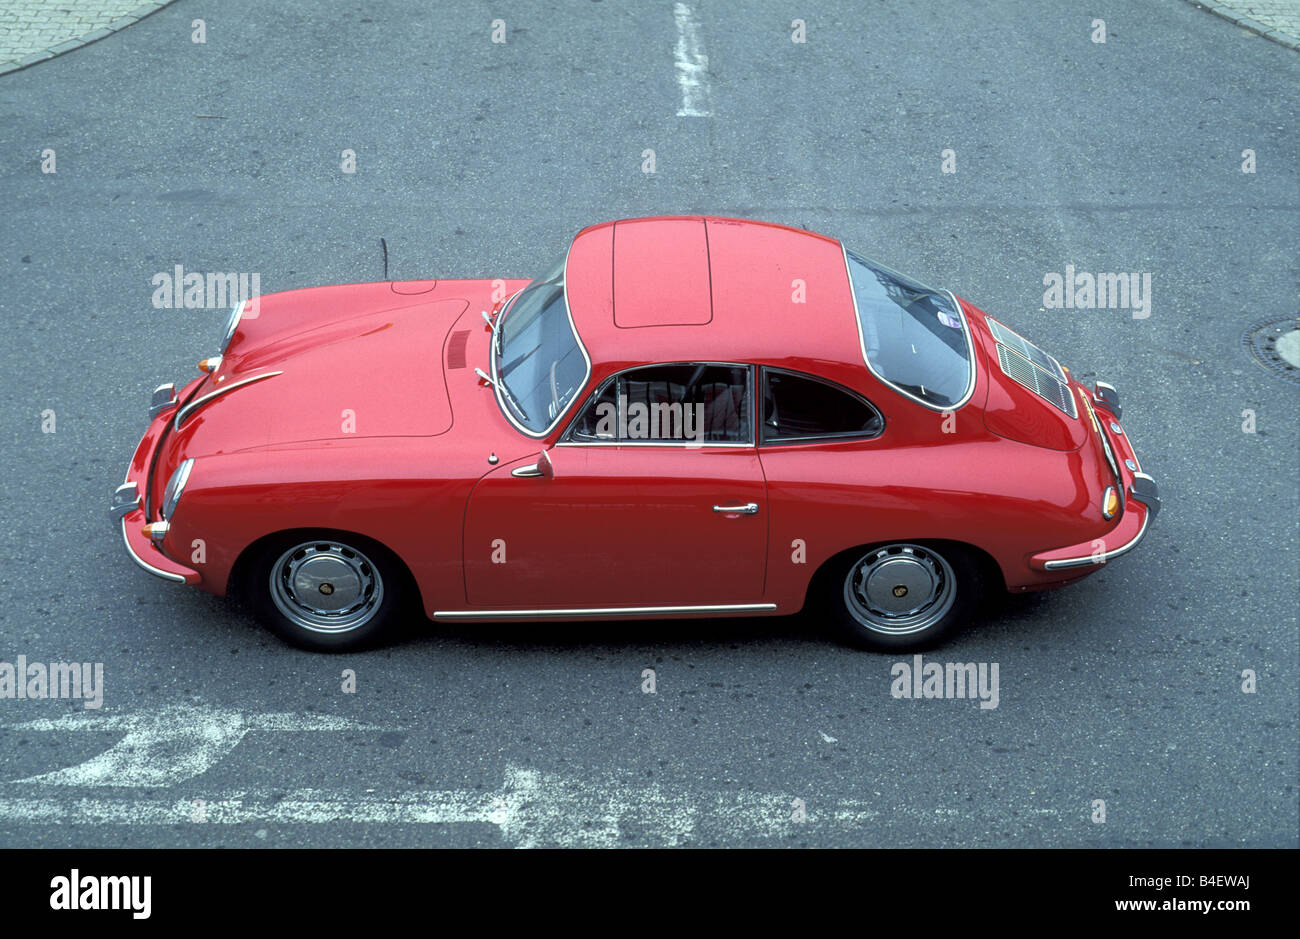 Car, Porsche 356 Carrera 2, model year 1963, red, sports car, Coupé, Coupe, red, vintage car, 1960s, sixties, standing, diagonal Stock Photo